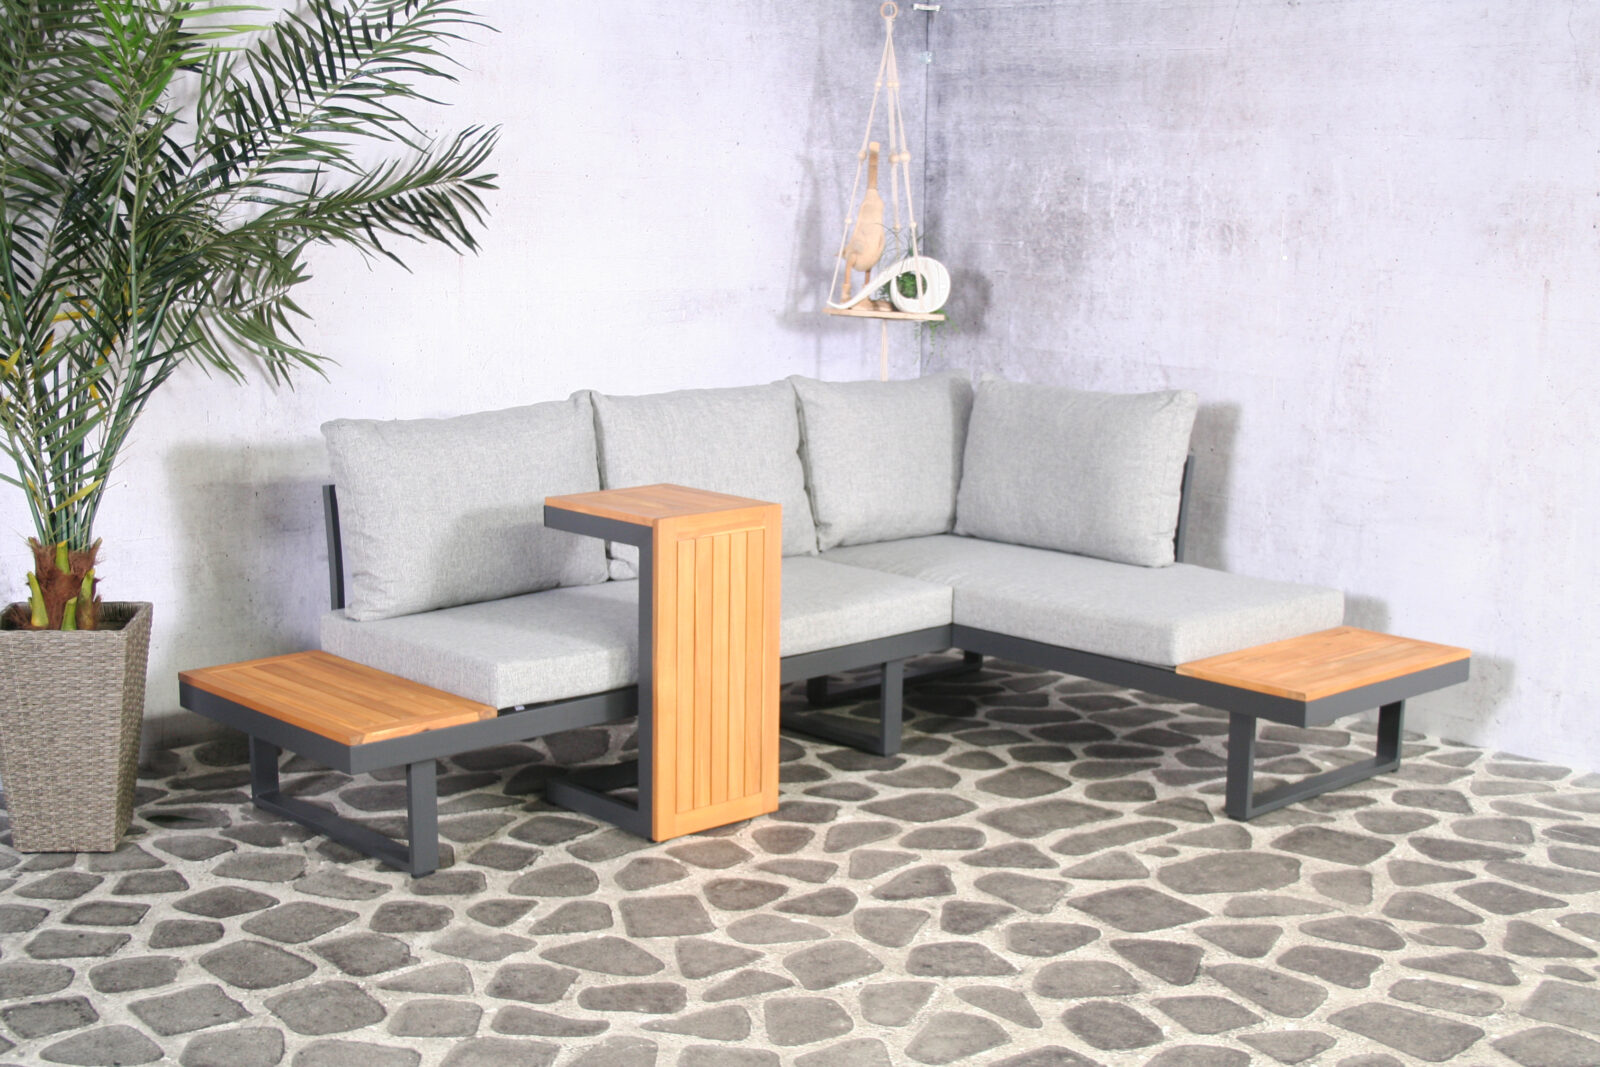 Loungeset Olympia | Multifunctioneel | 4-persoons Olympia loungeset 35130 7 scaled